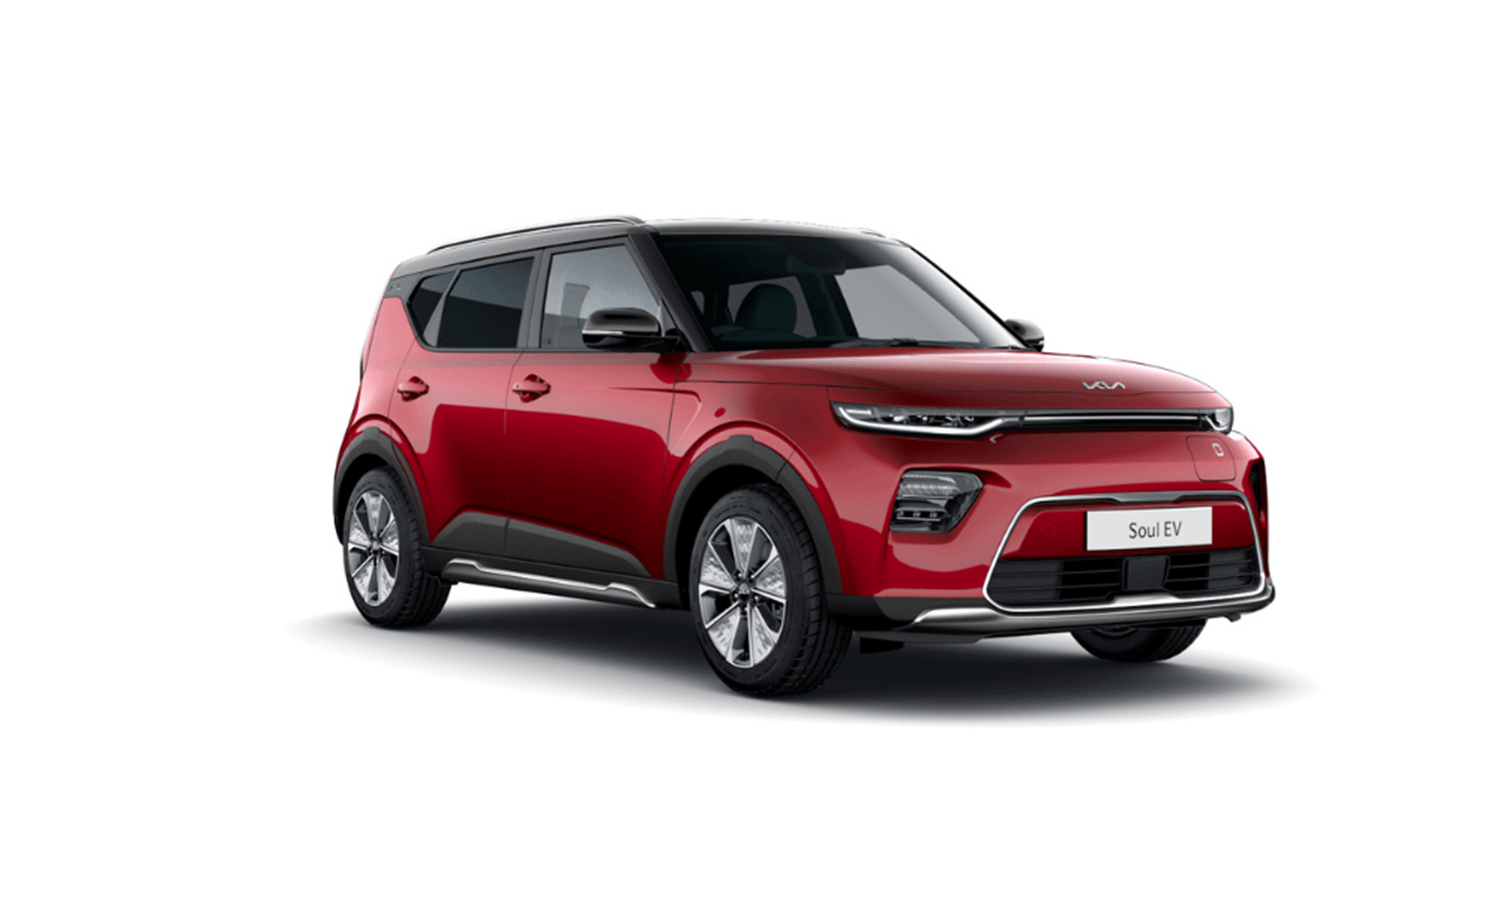 Kia Soul EV Maxx in Cherry Red Front Side View